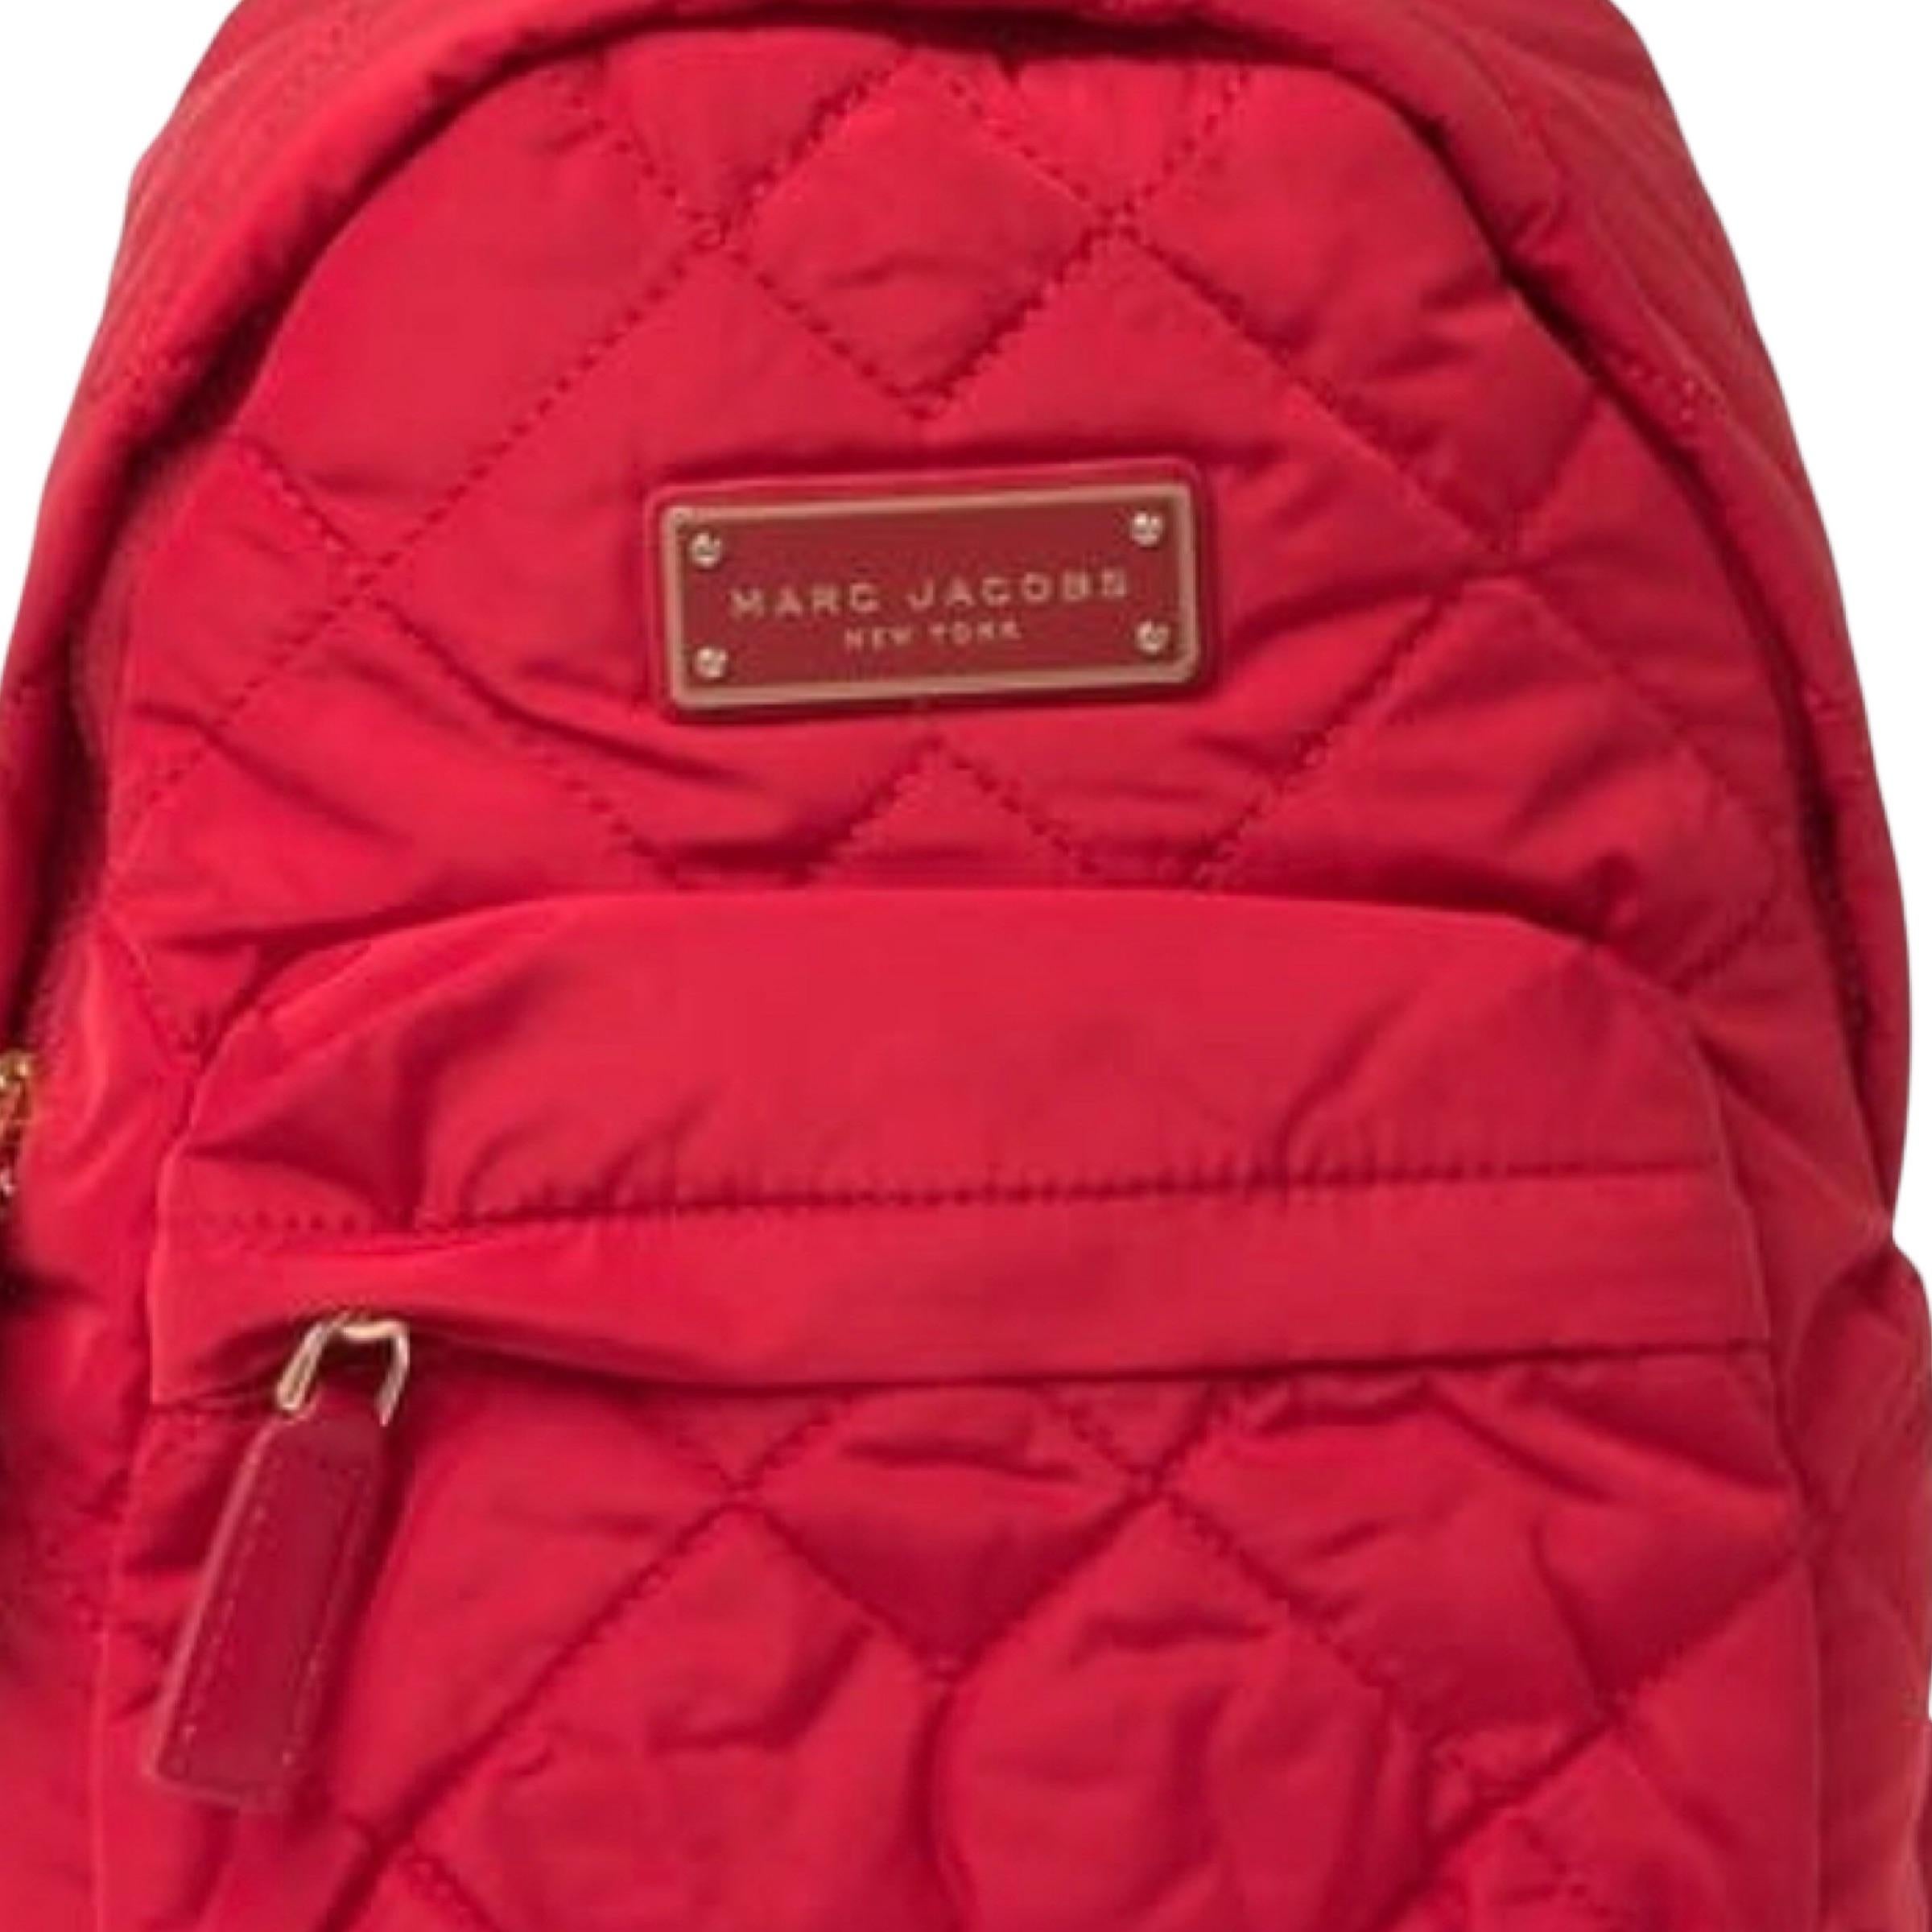 NEW Marc Jacobs Red Quilted Nylon Mini Backpack Rucksack Bag 1